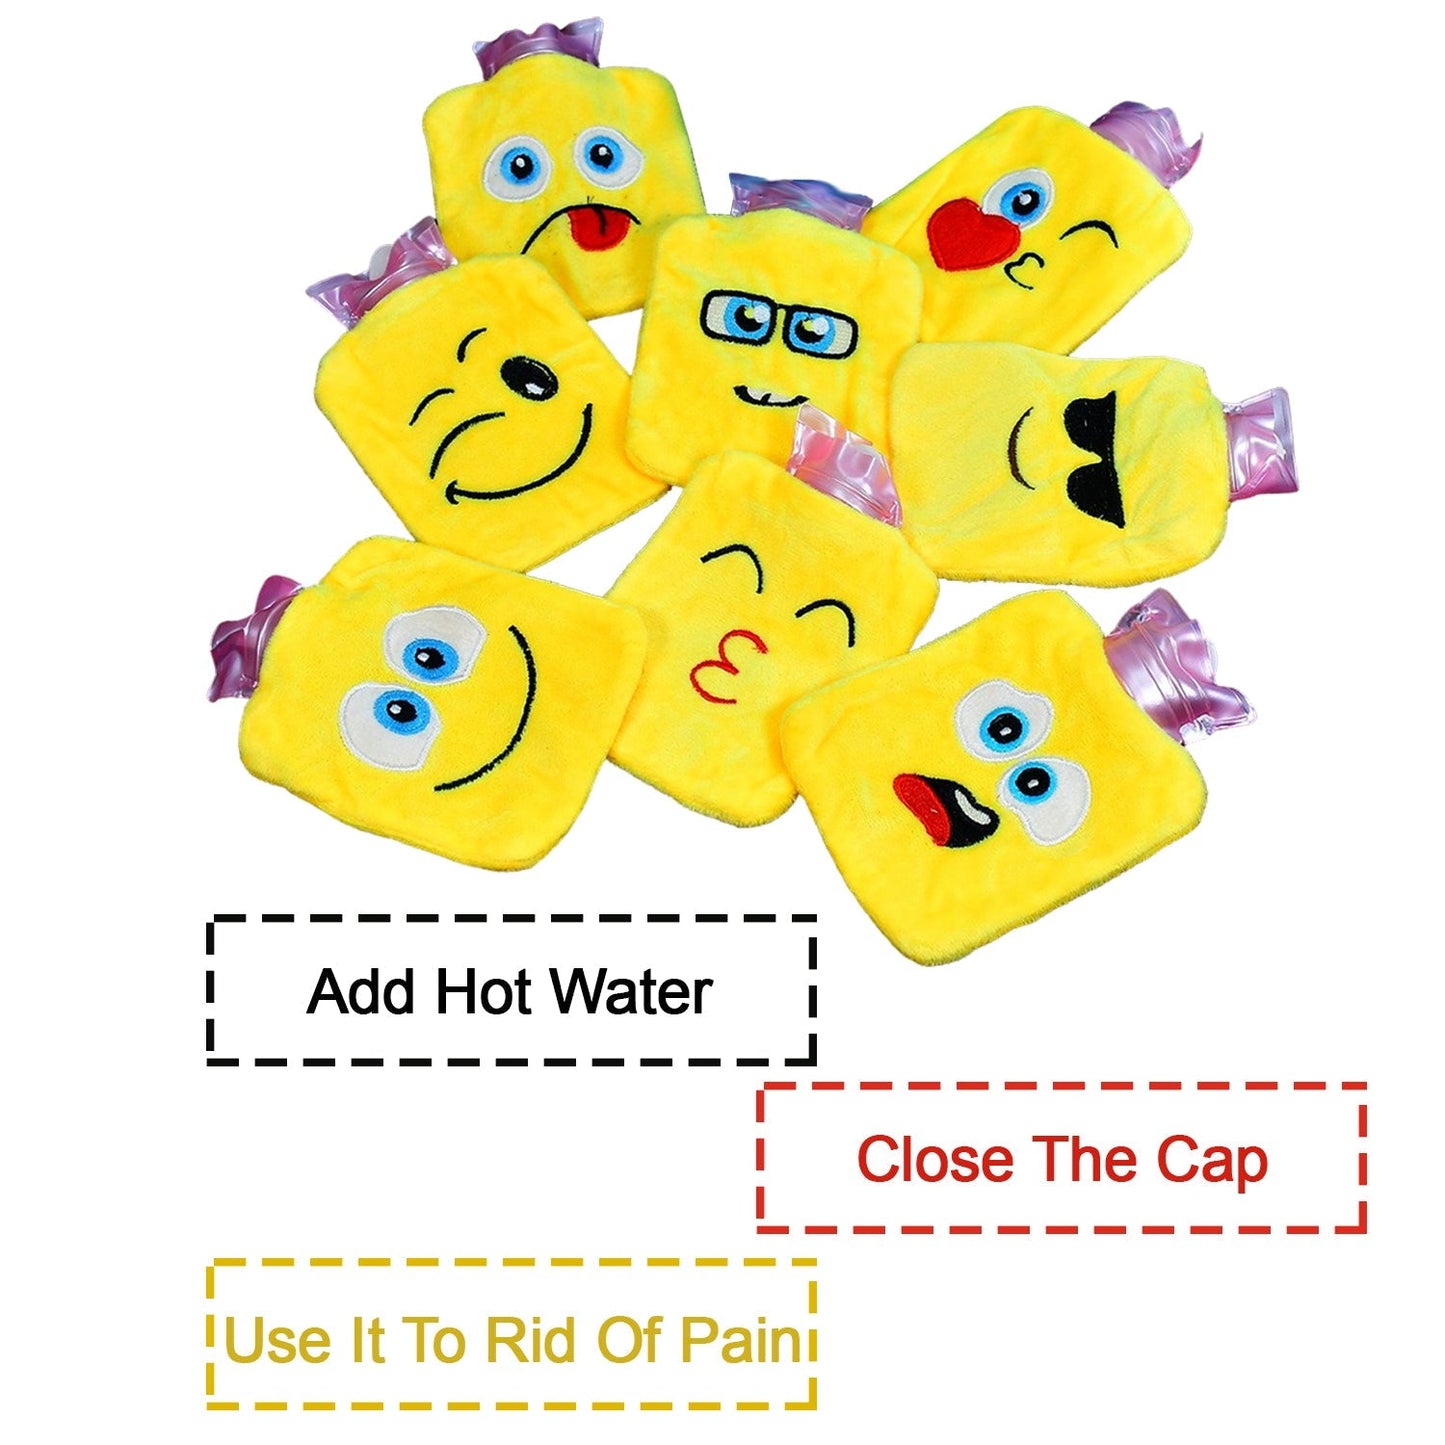 6535 1pc Mix Emoji designs small Hot Water Bag with Cover for Pain Relief, Neck, Shoulder Pain and Hand, Feet Warmer, Menstrual Cramps. DeoDap